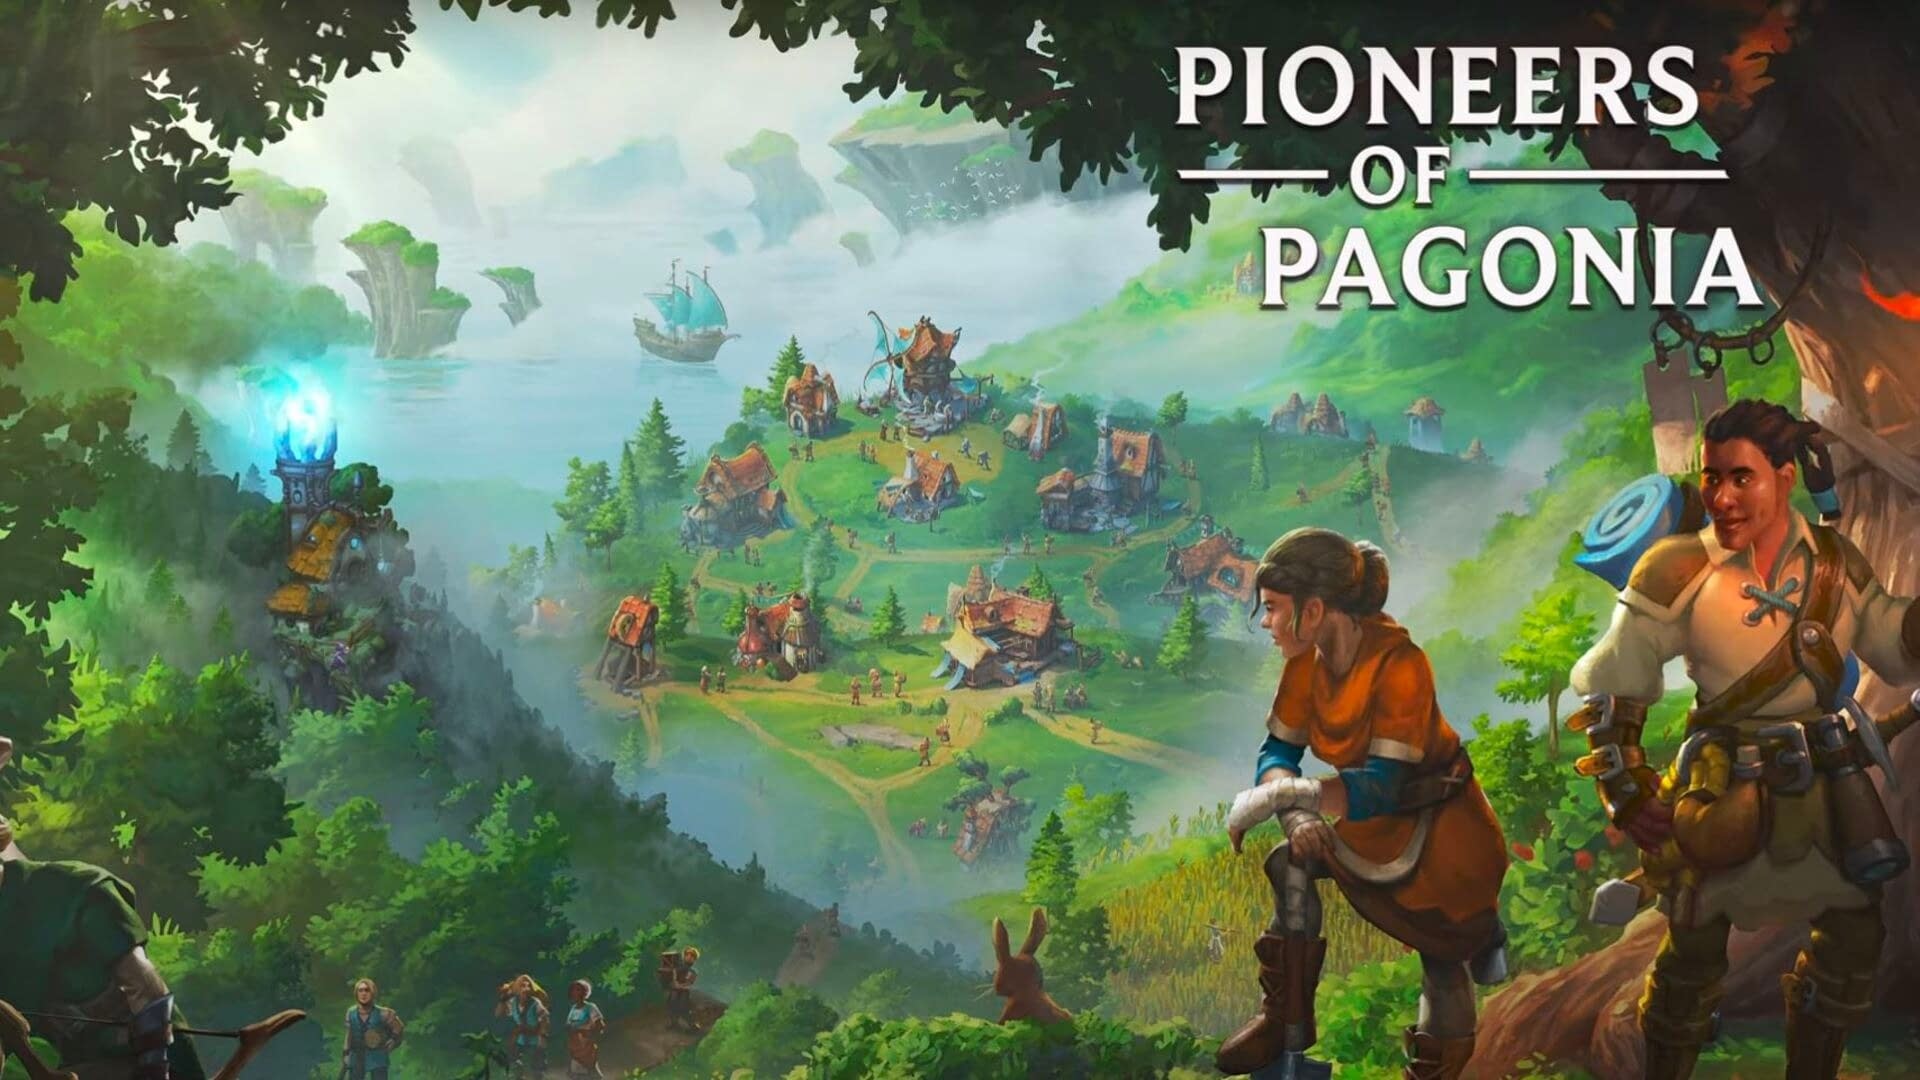 City Kurma Game Pioneers of Pagonia Comes on December 13